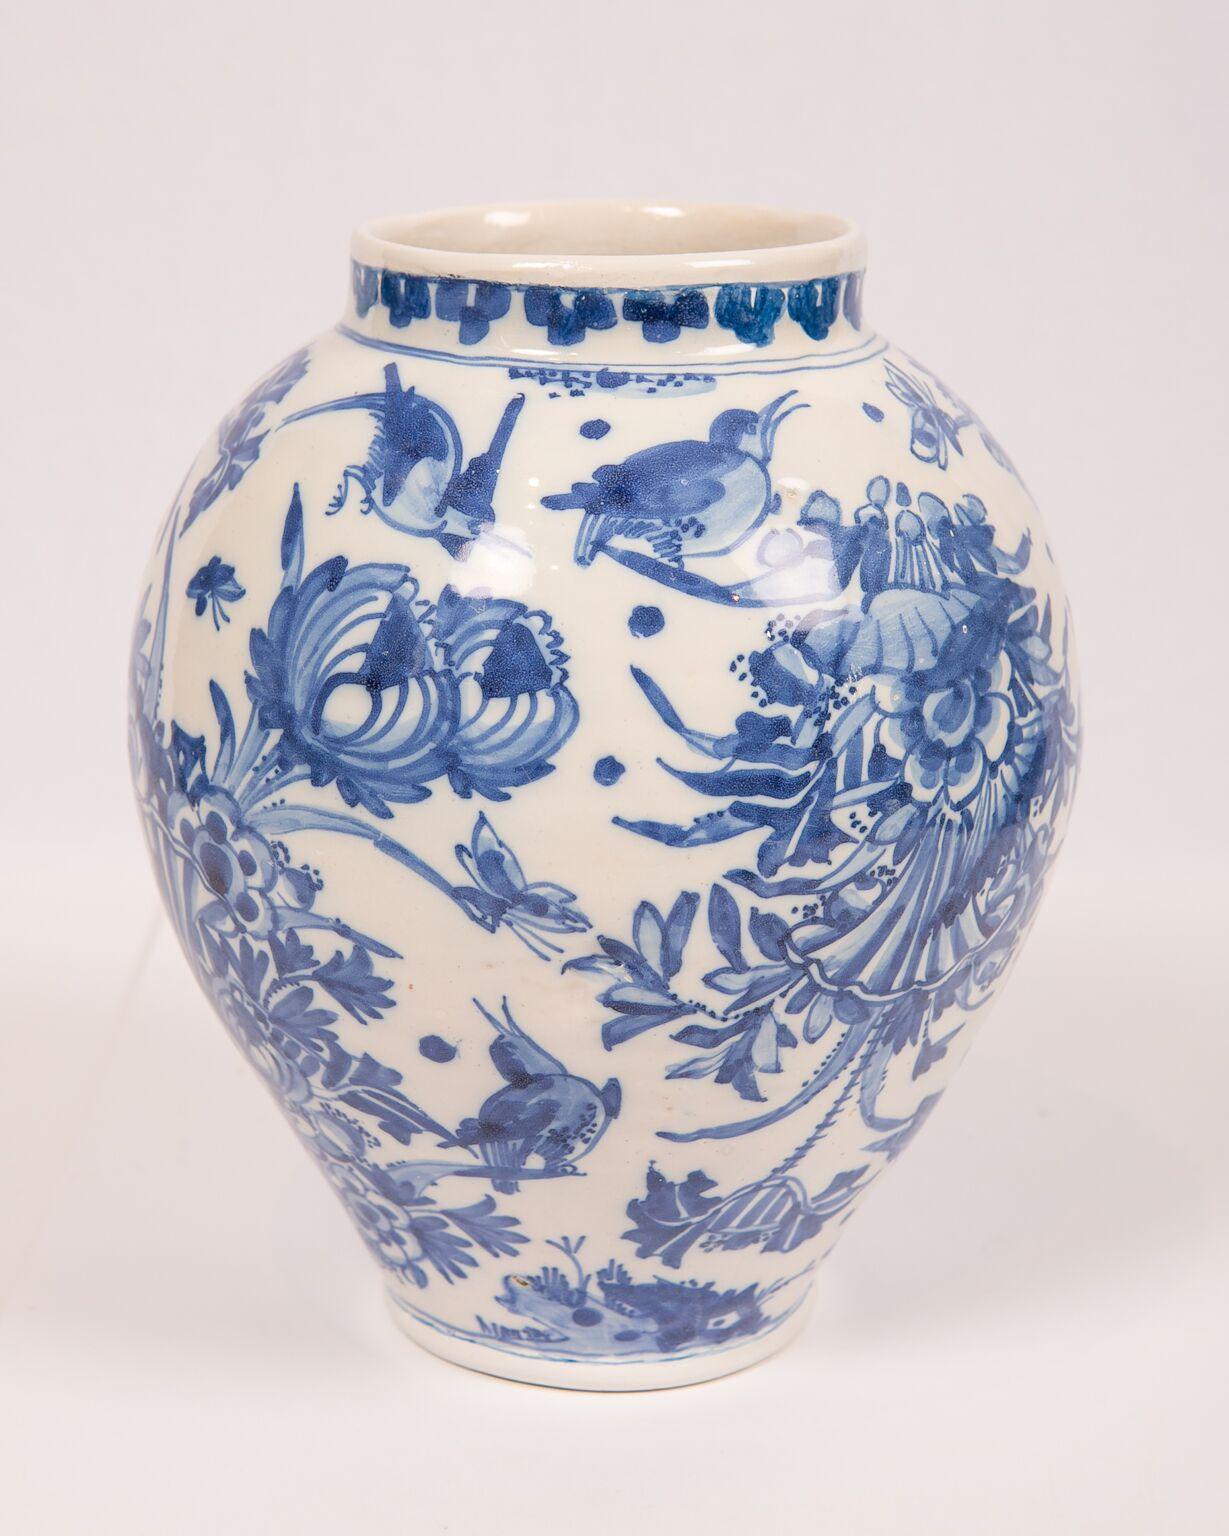 London Delftware Blue and White Flower Vase 17th Century circa 1685 1